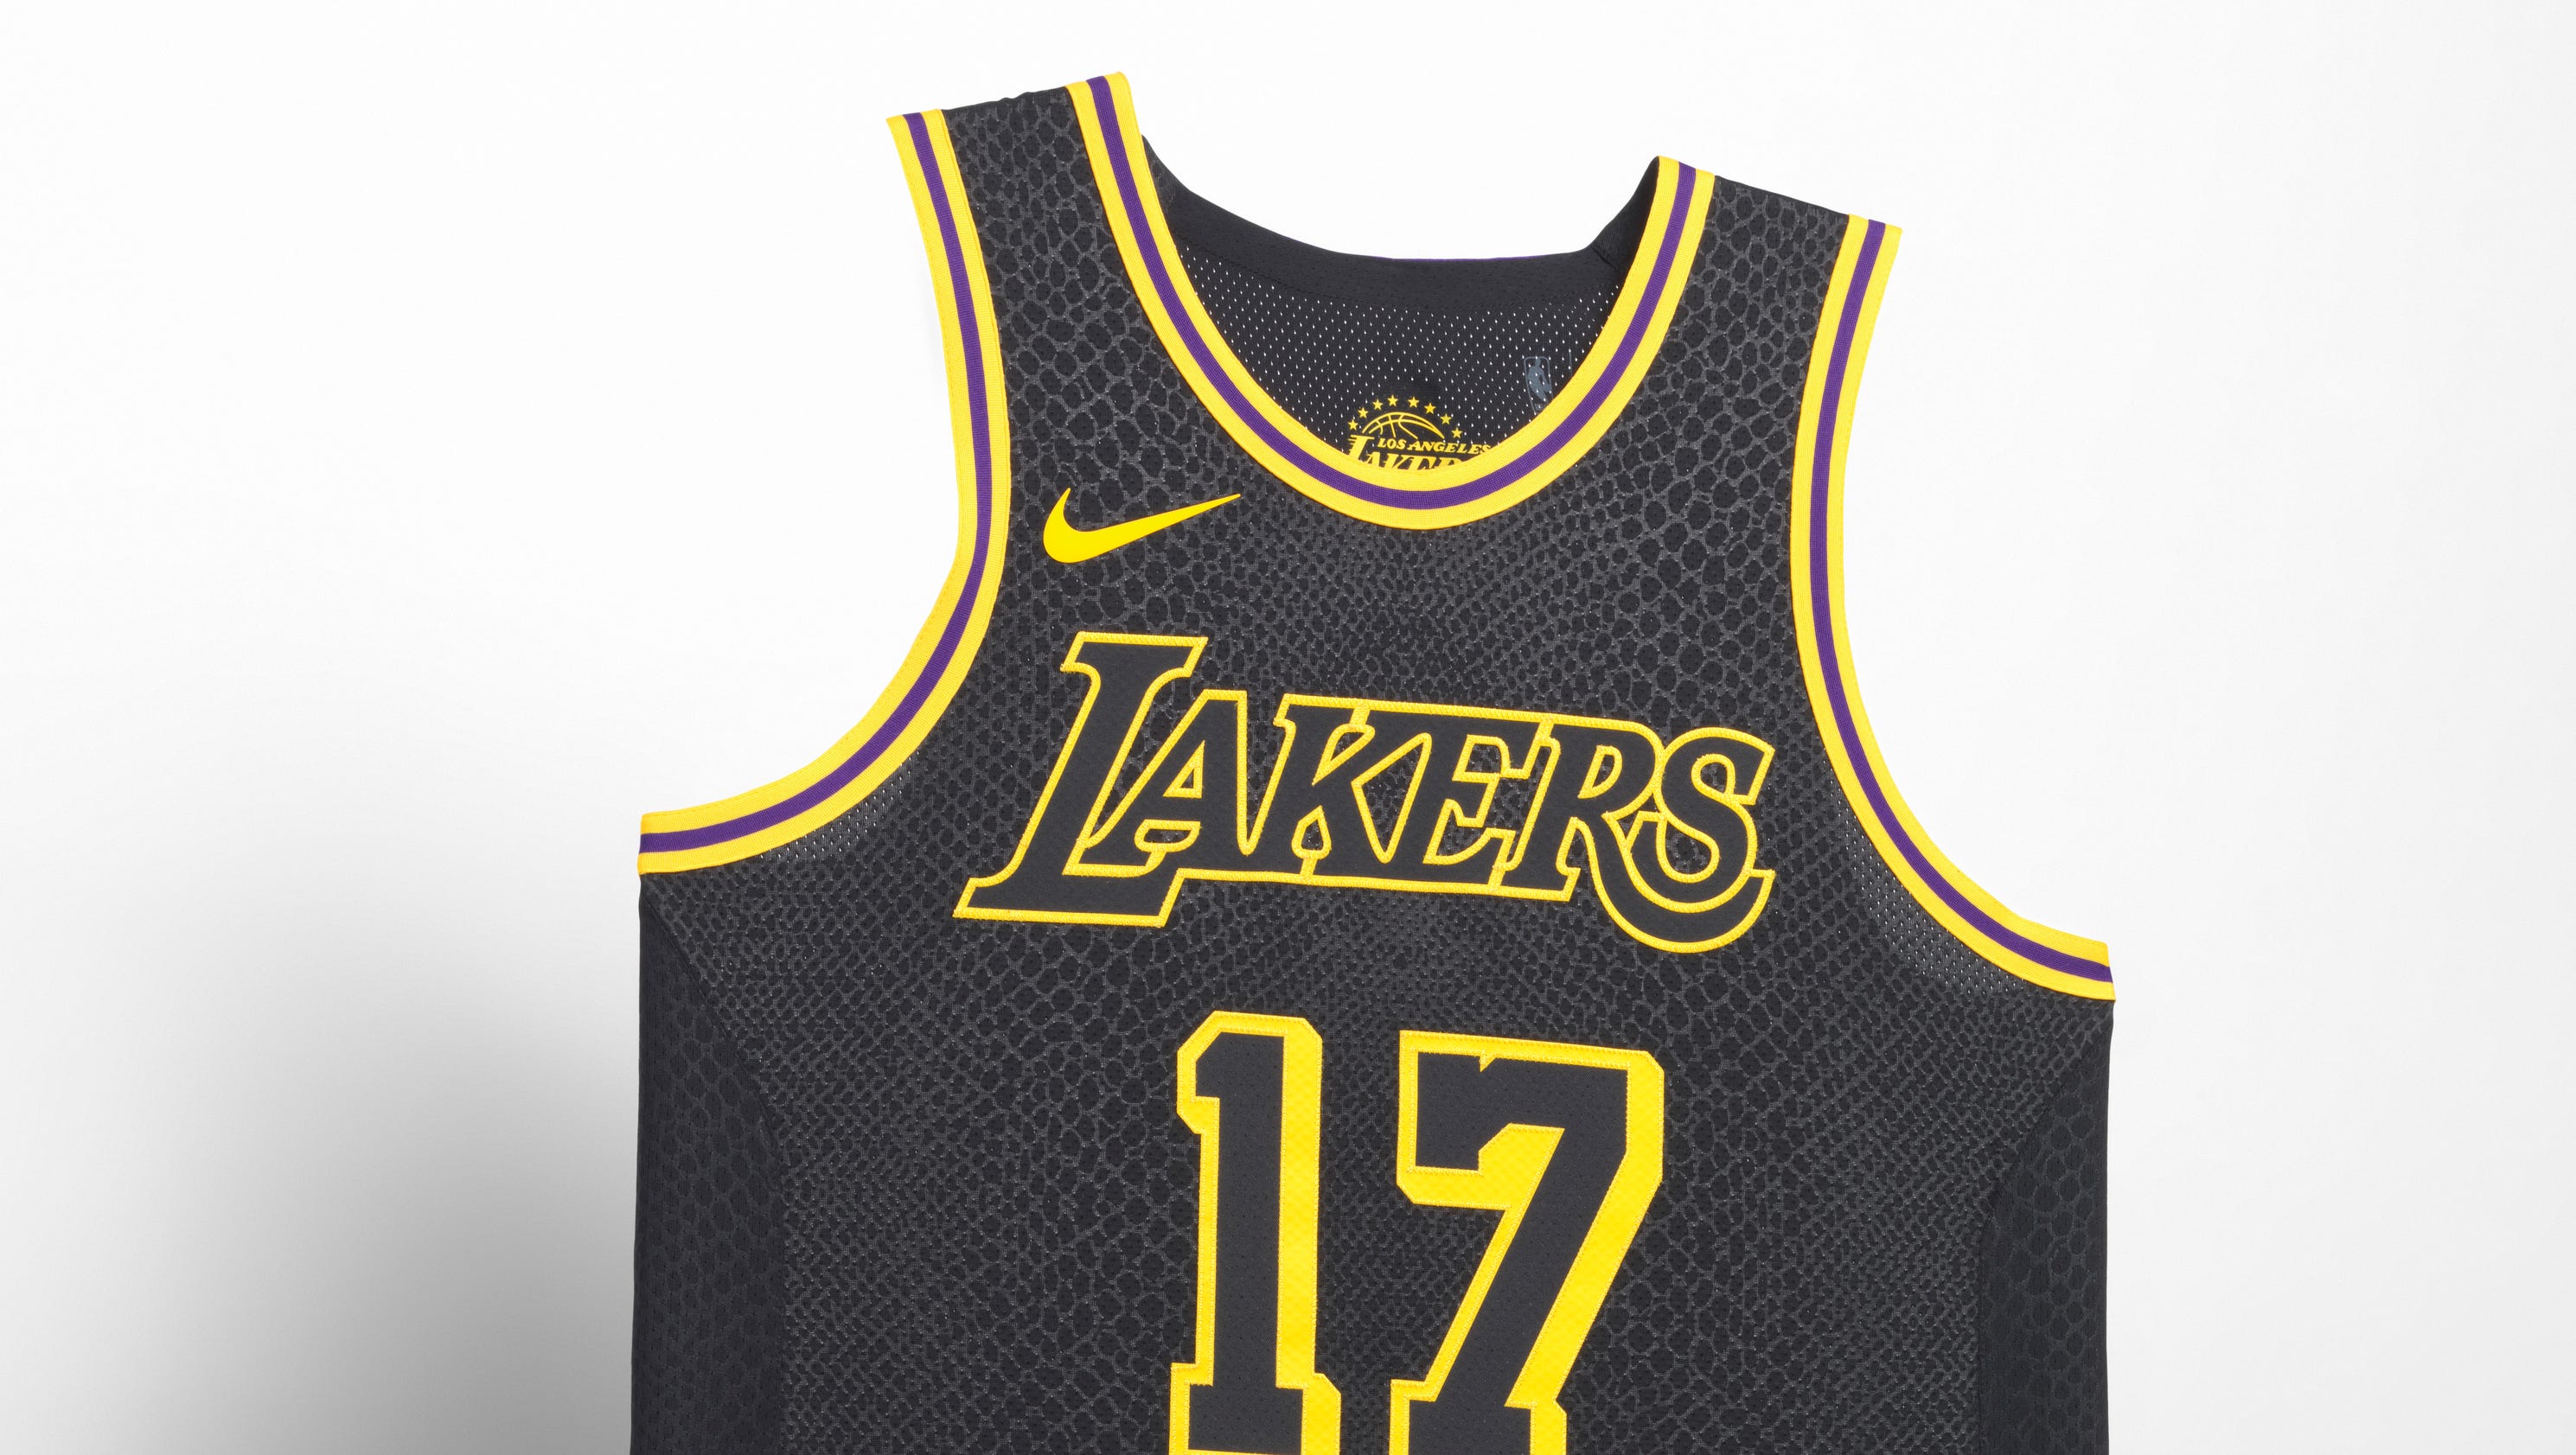 Nike NBA City Edition uniforms: The story behind the design process3200 x 1680